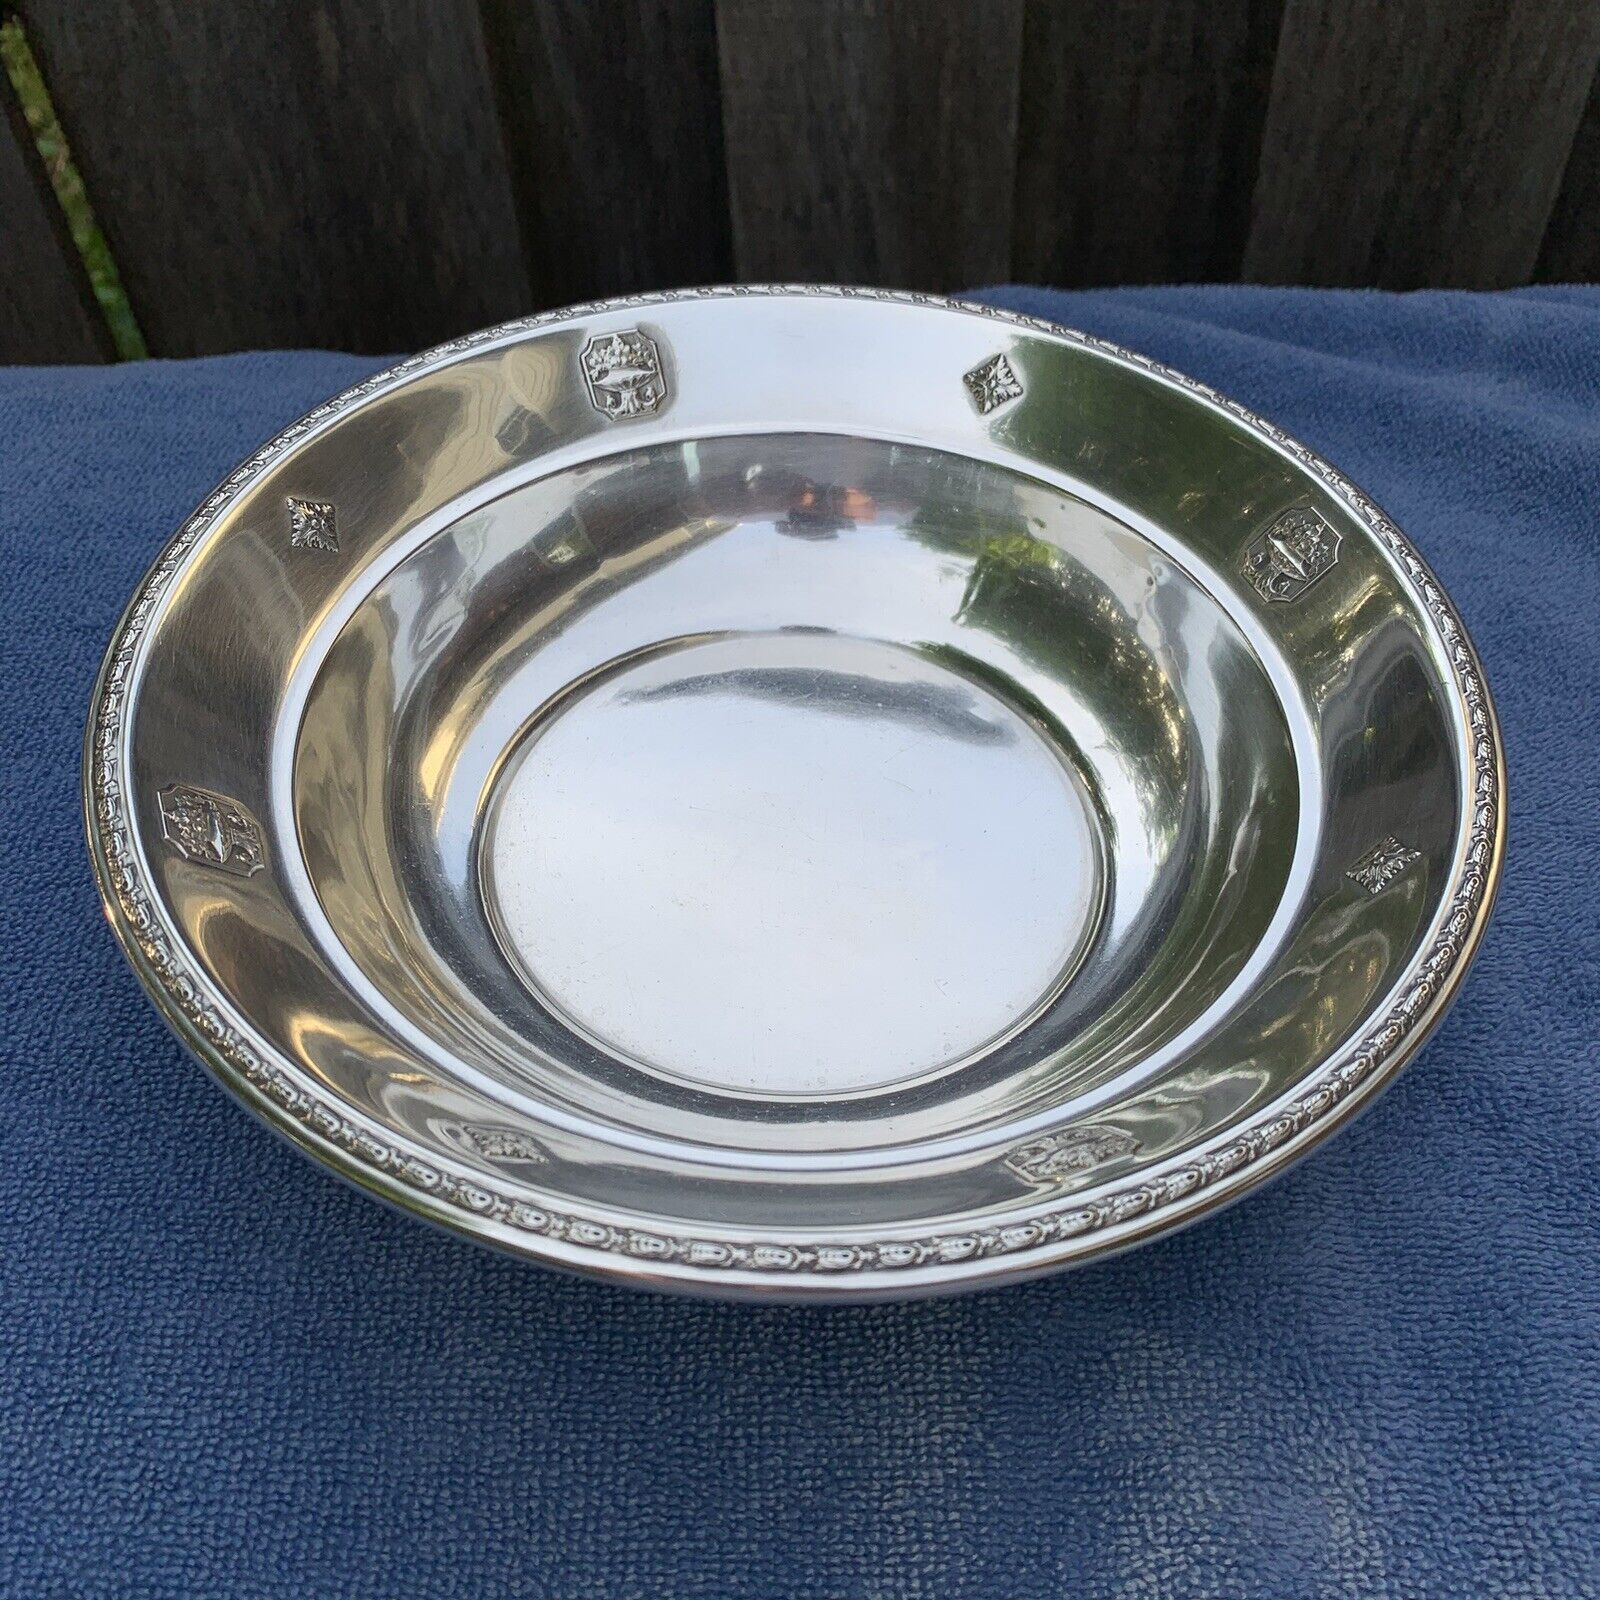 Vintage Sterling Silver Candy Dish Soup Bowl Made By Alvin 9 1/4” Dia Beautiful